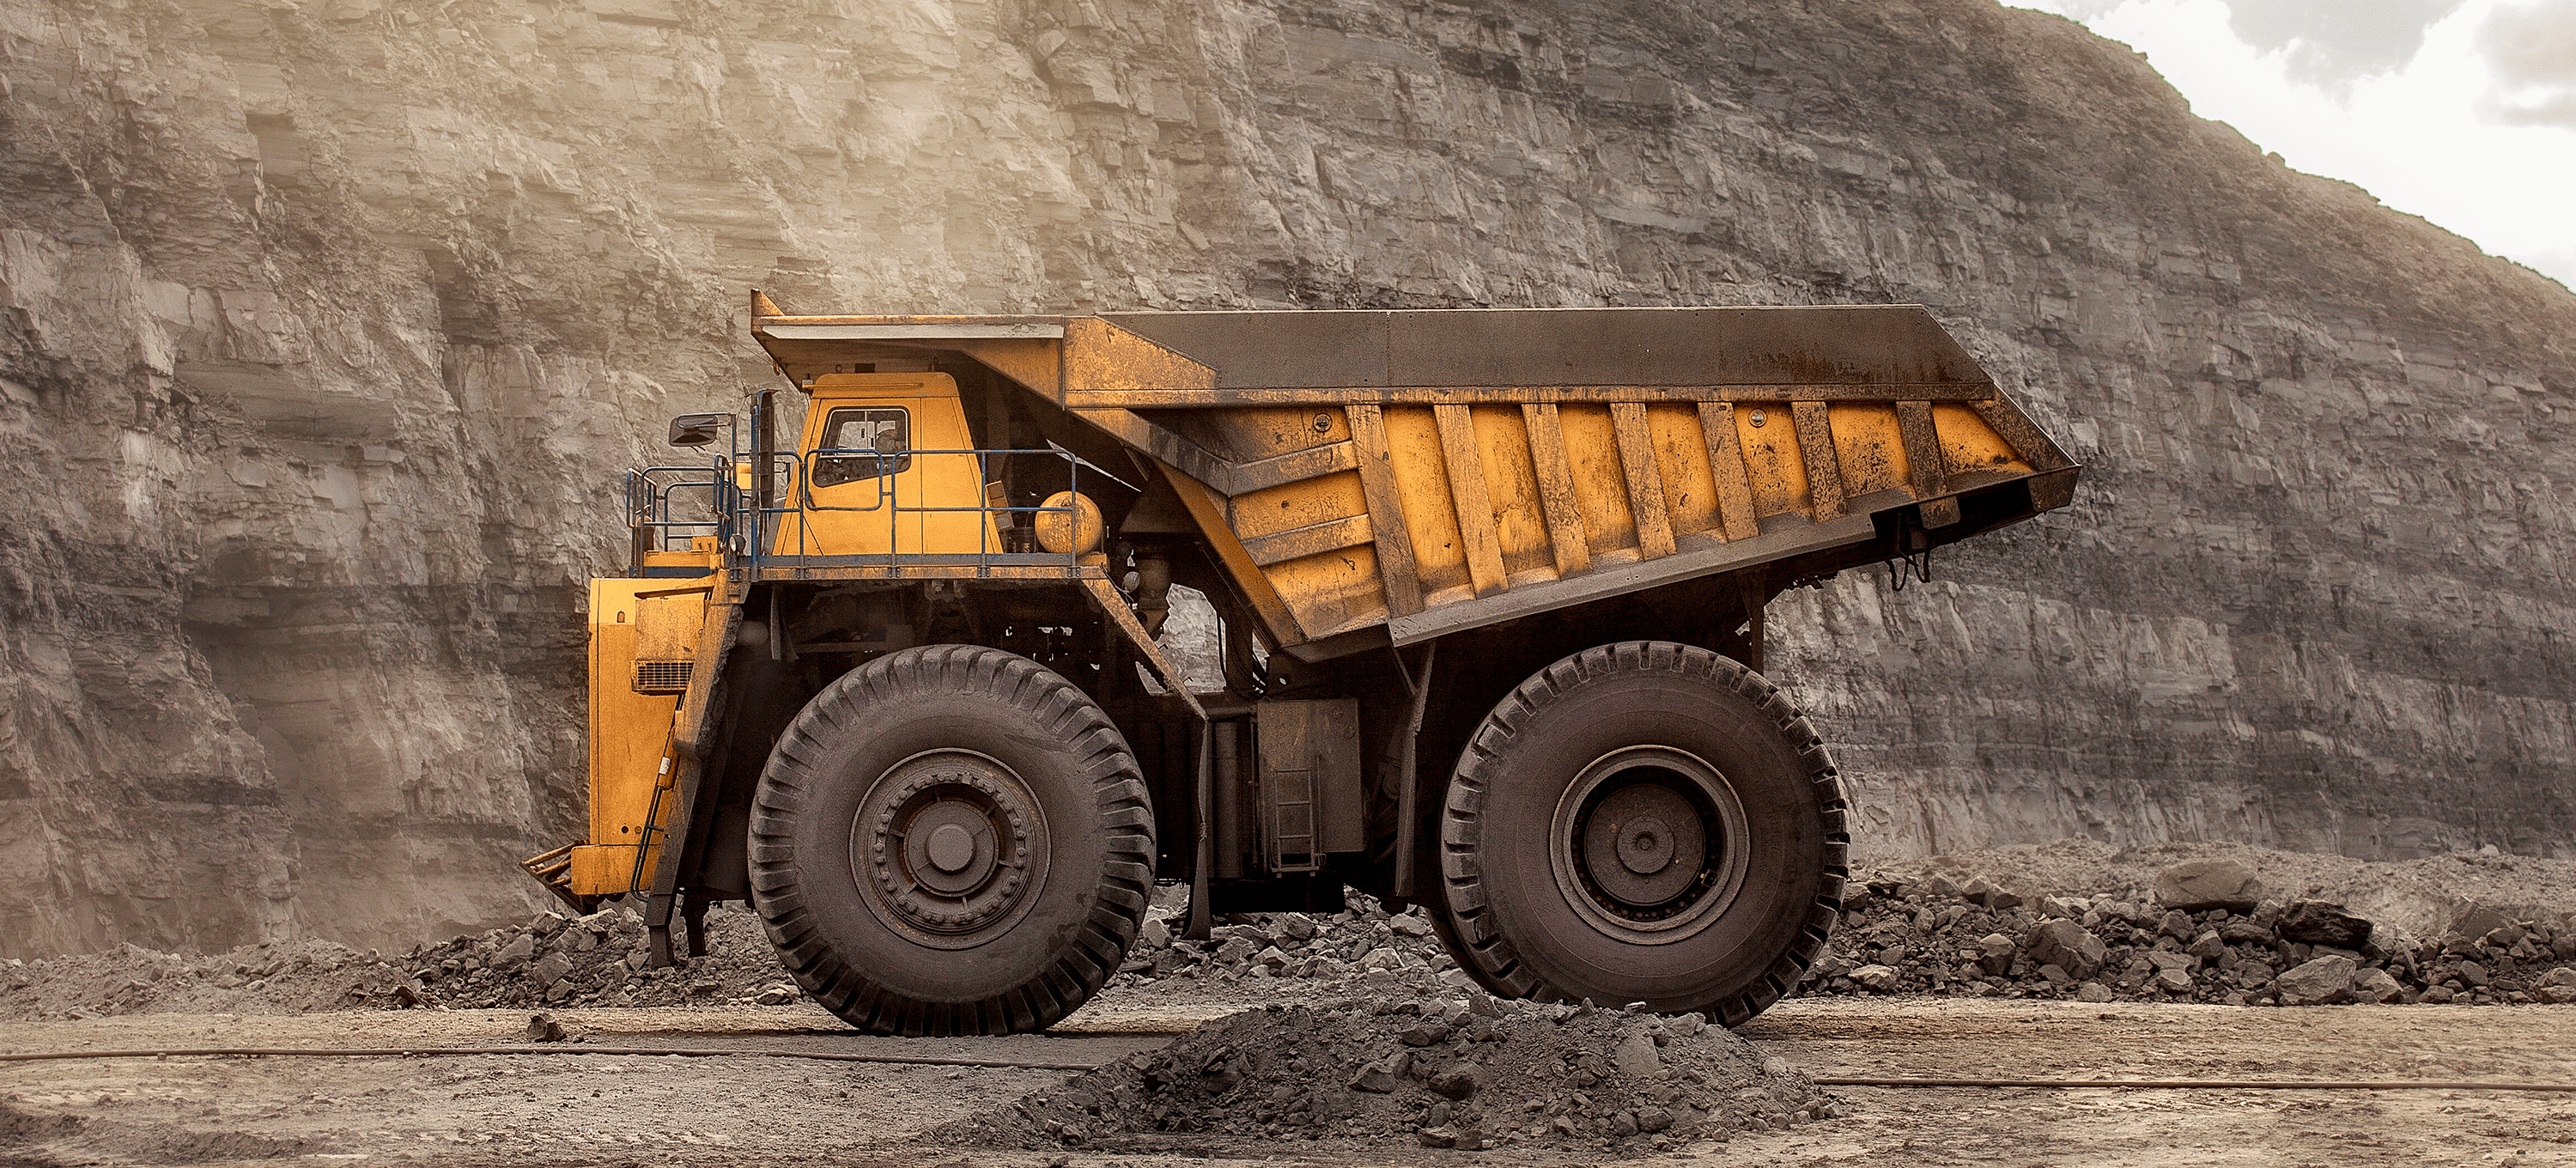 Large yellow mining vehicle in quarry